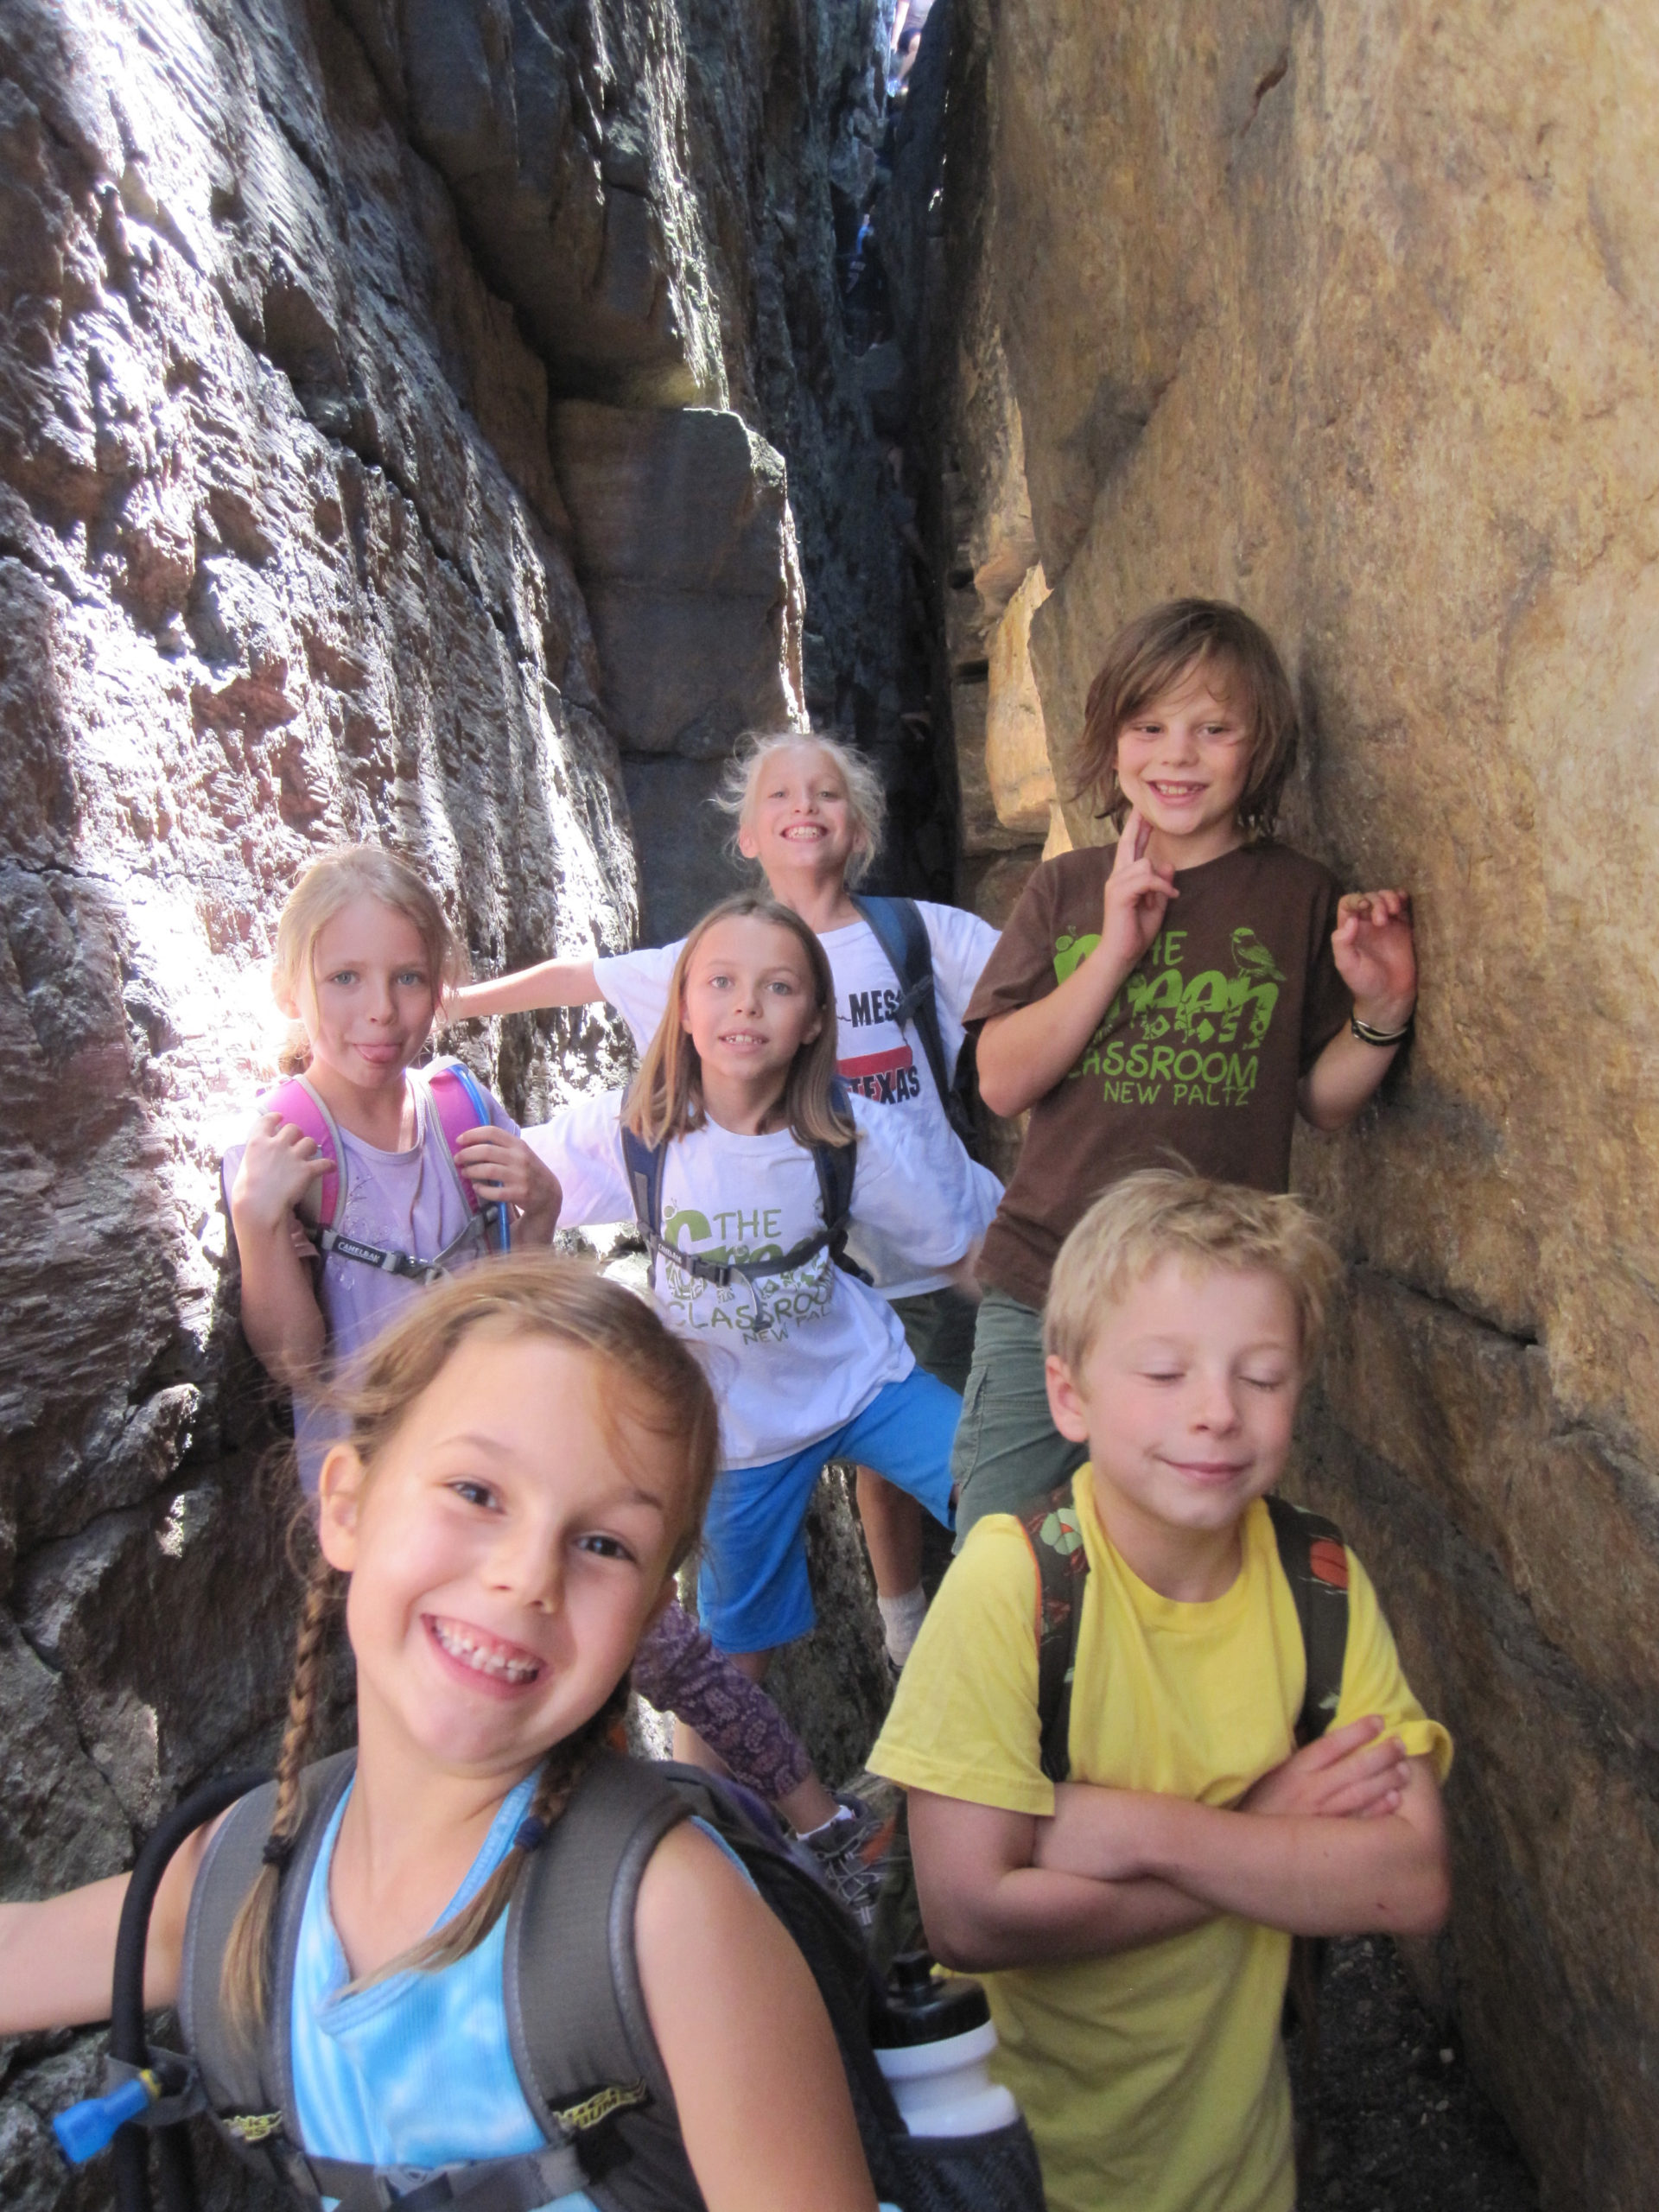 Children on a hike smiling